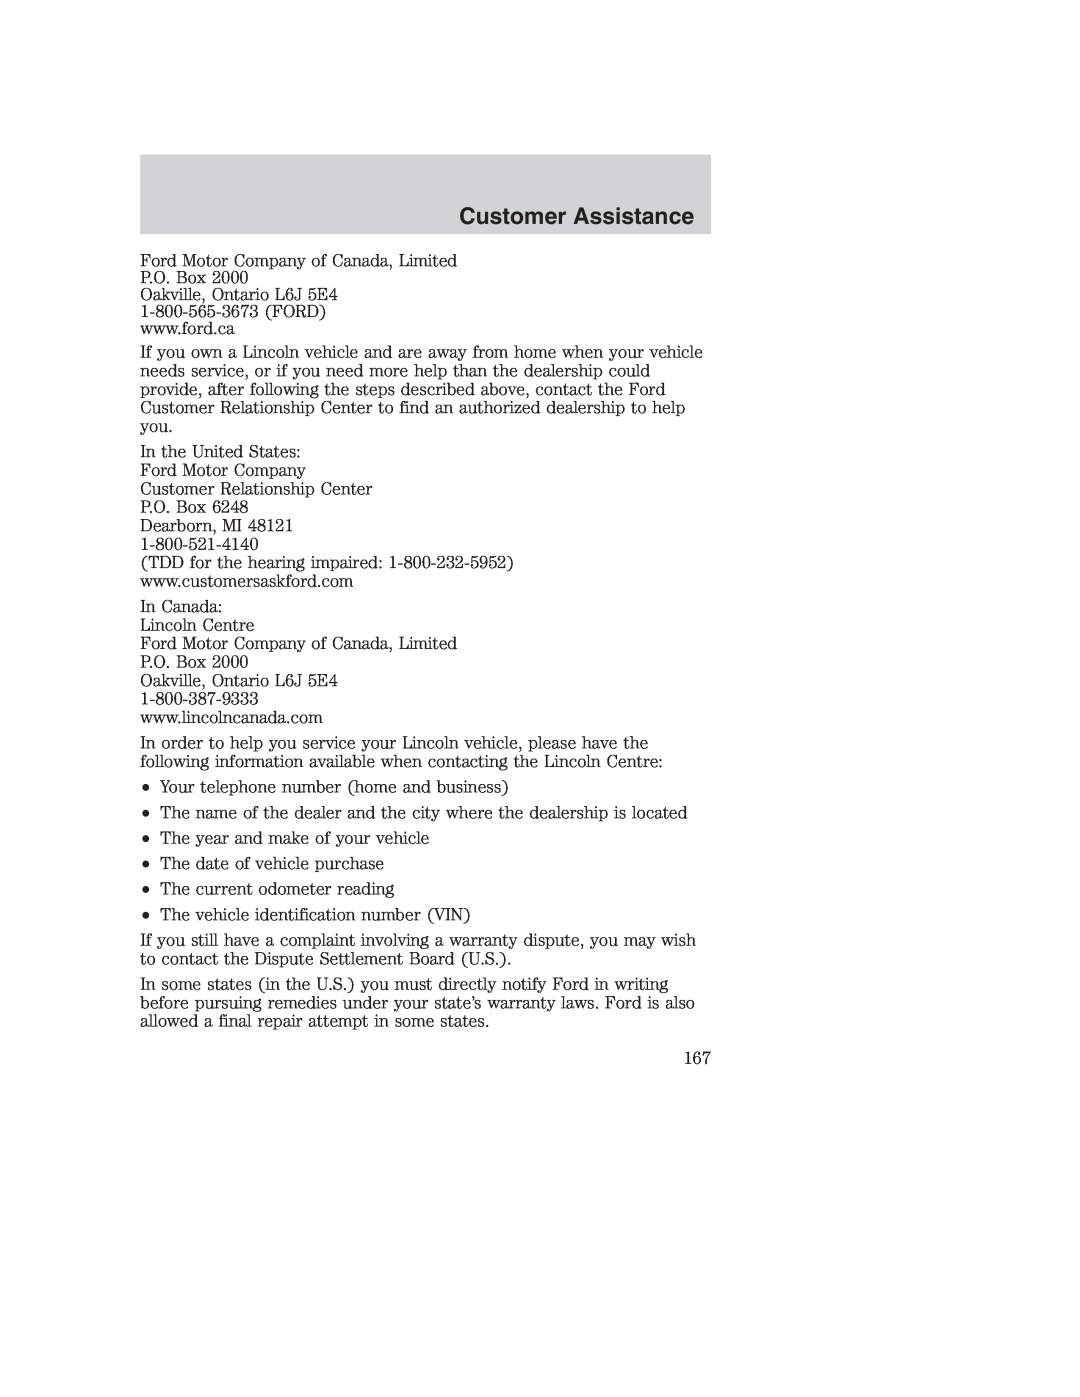 Ford AM/FM stereo manual Customer Assistance 